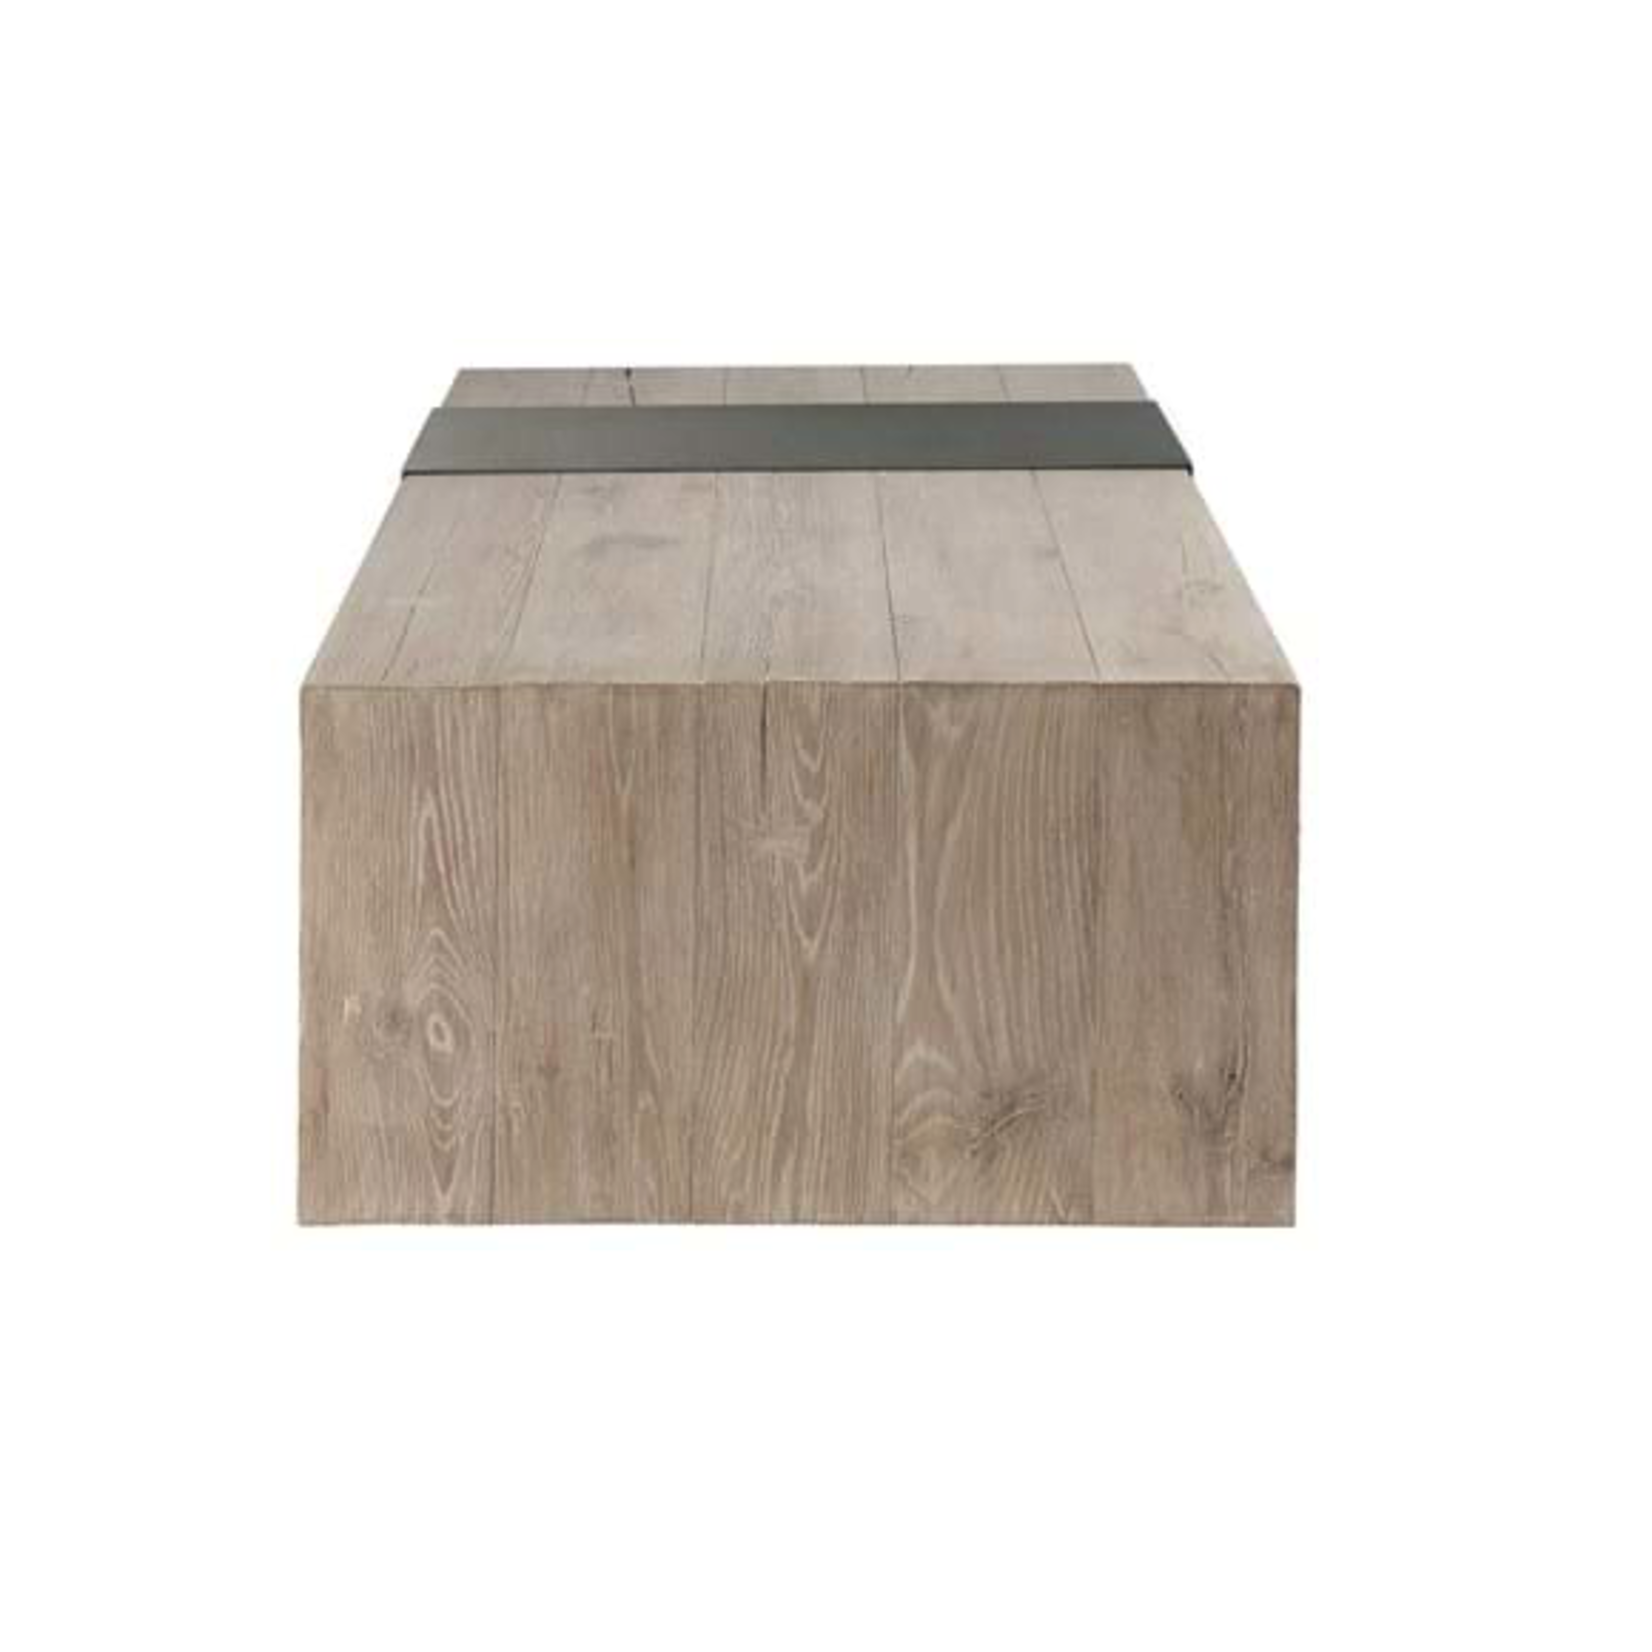 Outside The Box 62x32x18 Danica White Washed Reclaimed Oak Iron Strap Coffee Table